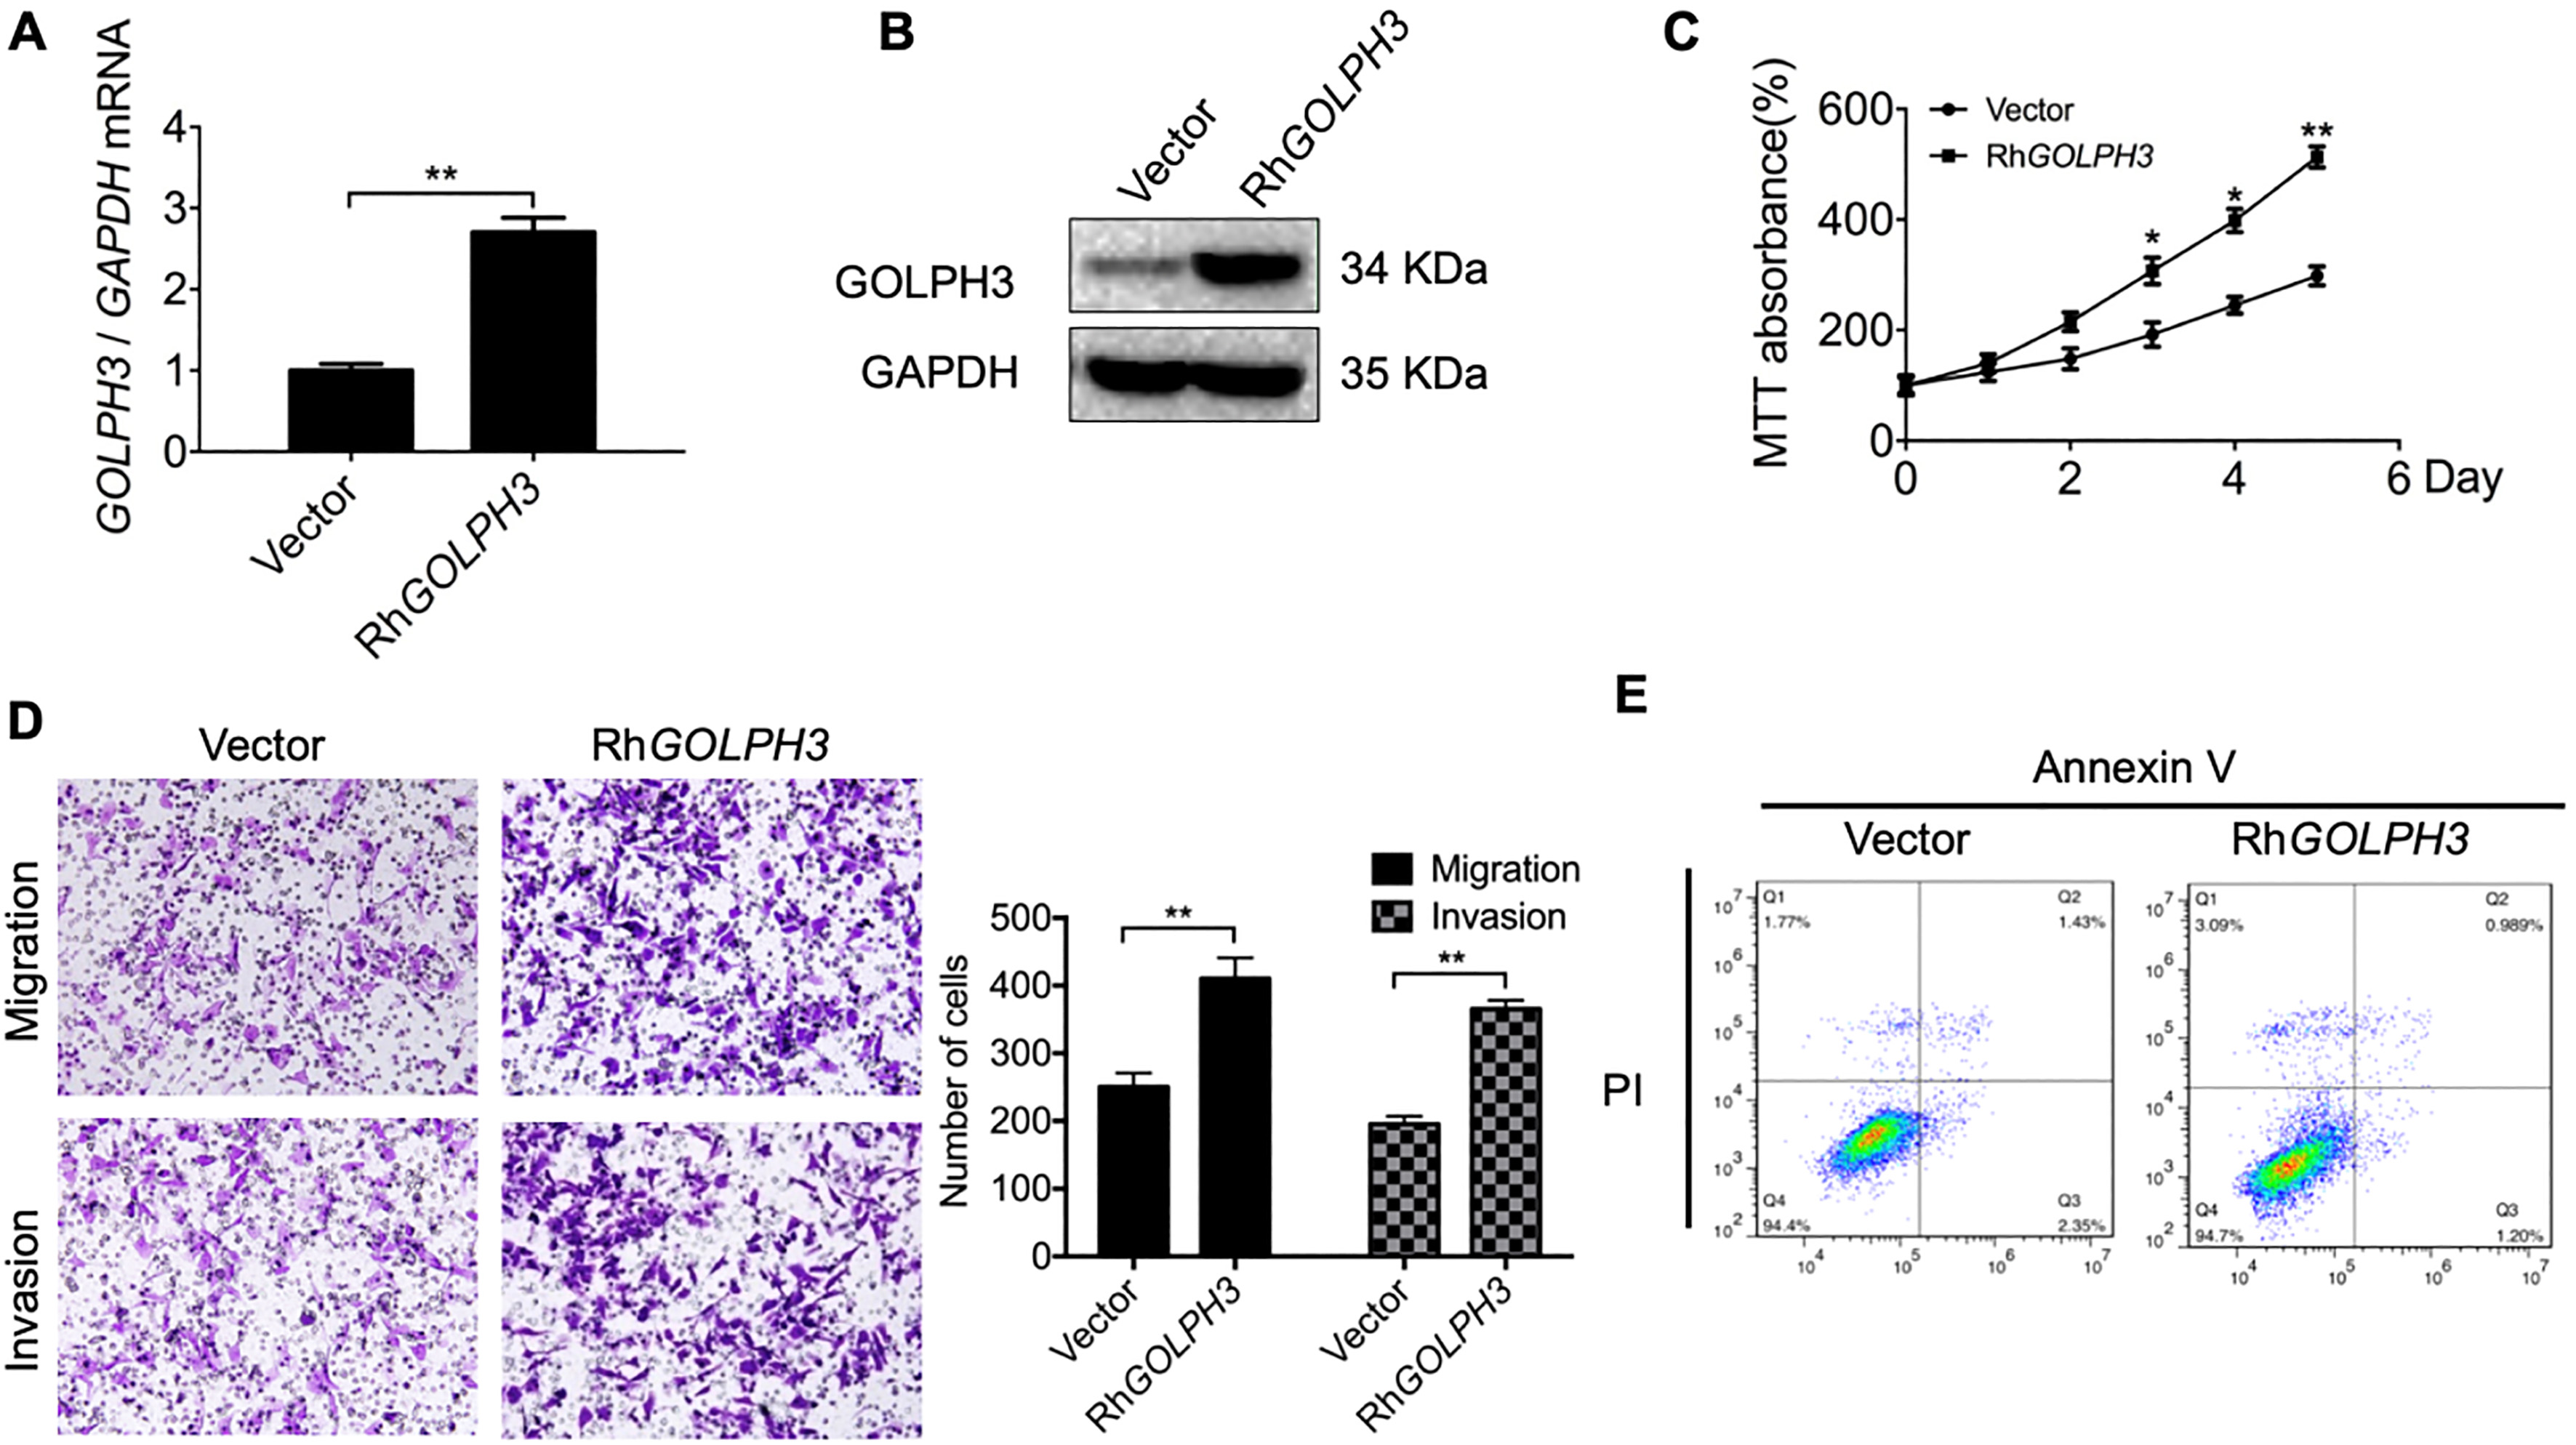 Ectopic overexpression of GOLPH3 in Ishikawa cells accelerates proliferation, migration, and invasion while inhibiting apoptosis in vitro. (A–B) GOLPH3 overexpression in Ishikawa-RhGOLPH3 cells compared to control cells was verified by qRT-PCR and western blotting. (C) Serial CCK-8 cell viability assays demonstrating faster proliferation rate of Ishikawa-RhGOLPH3 cells versus controls. (D) Overexpression of GOLPH3 also accelerated cell migration and invasion in transwell assays. Magnification 100×. (E) Overexpression of GOLPH3 inhibited apoptosis of Ishikawa cells. All values are the mean ± SD of three independent experiments. P*< 0.05, P**< 0.01.